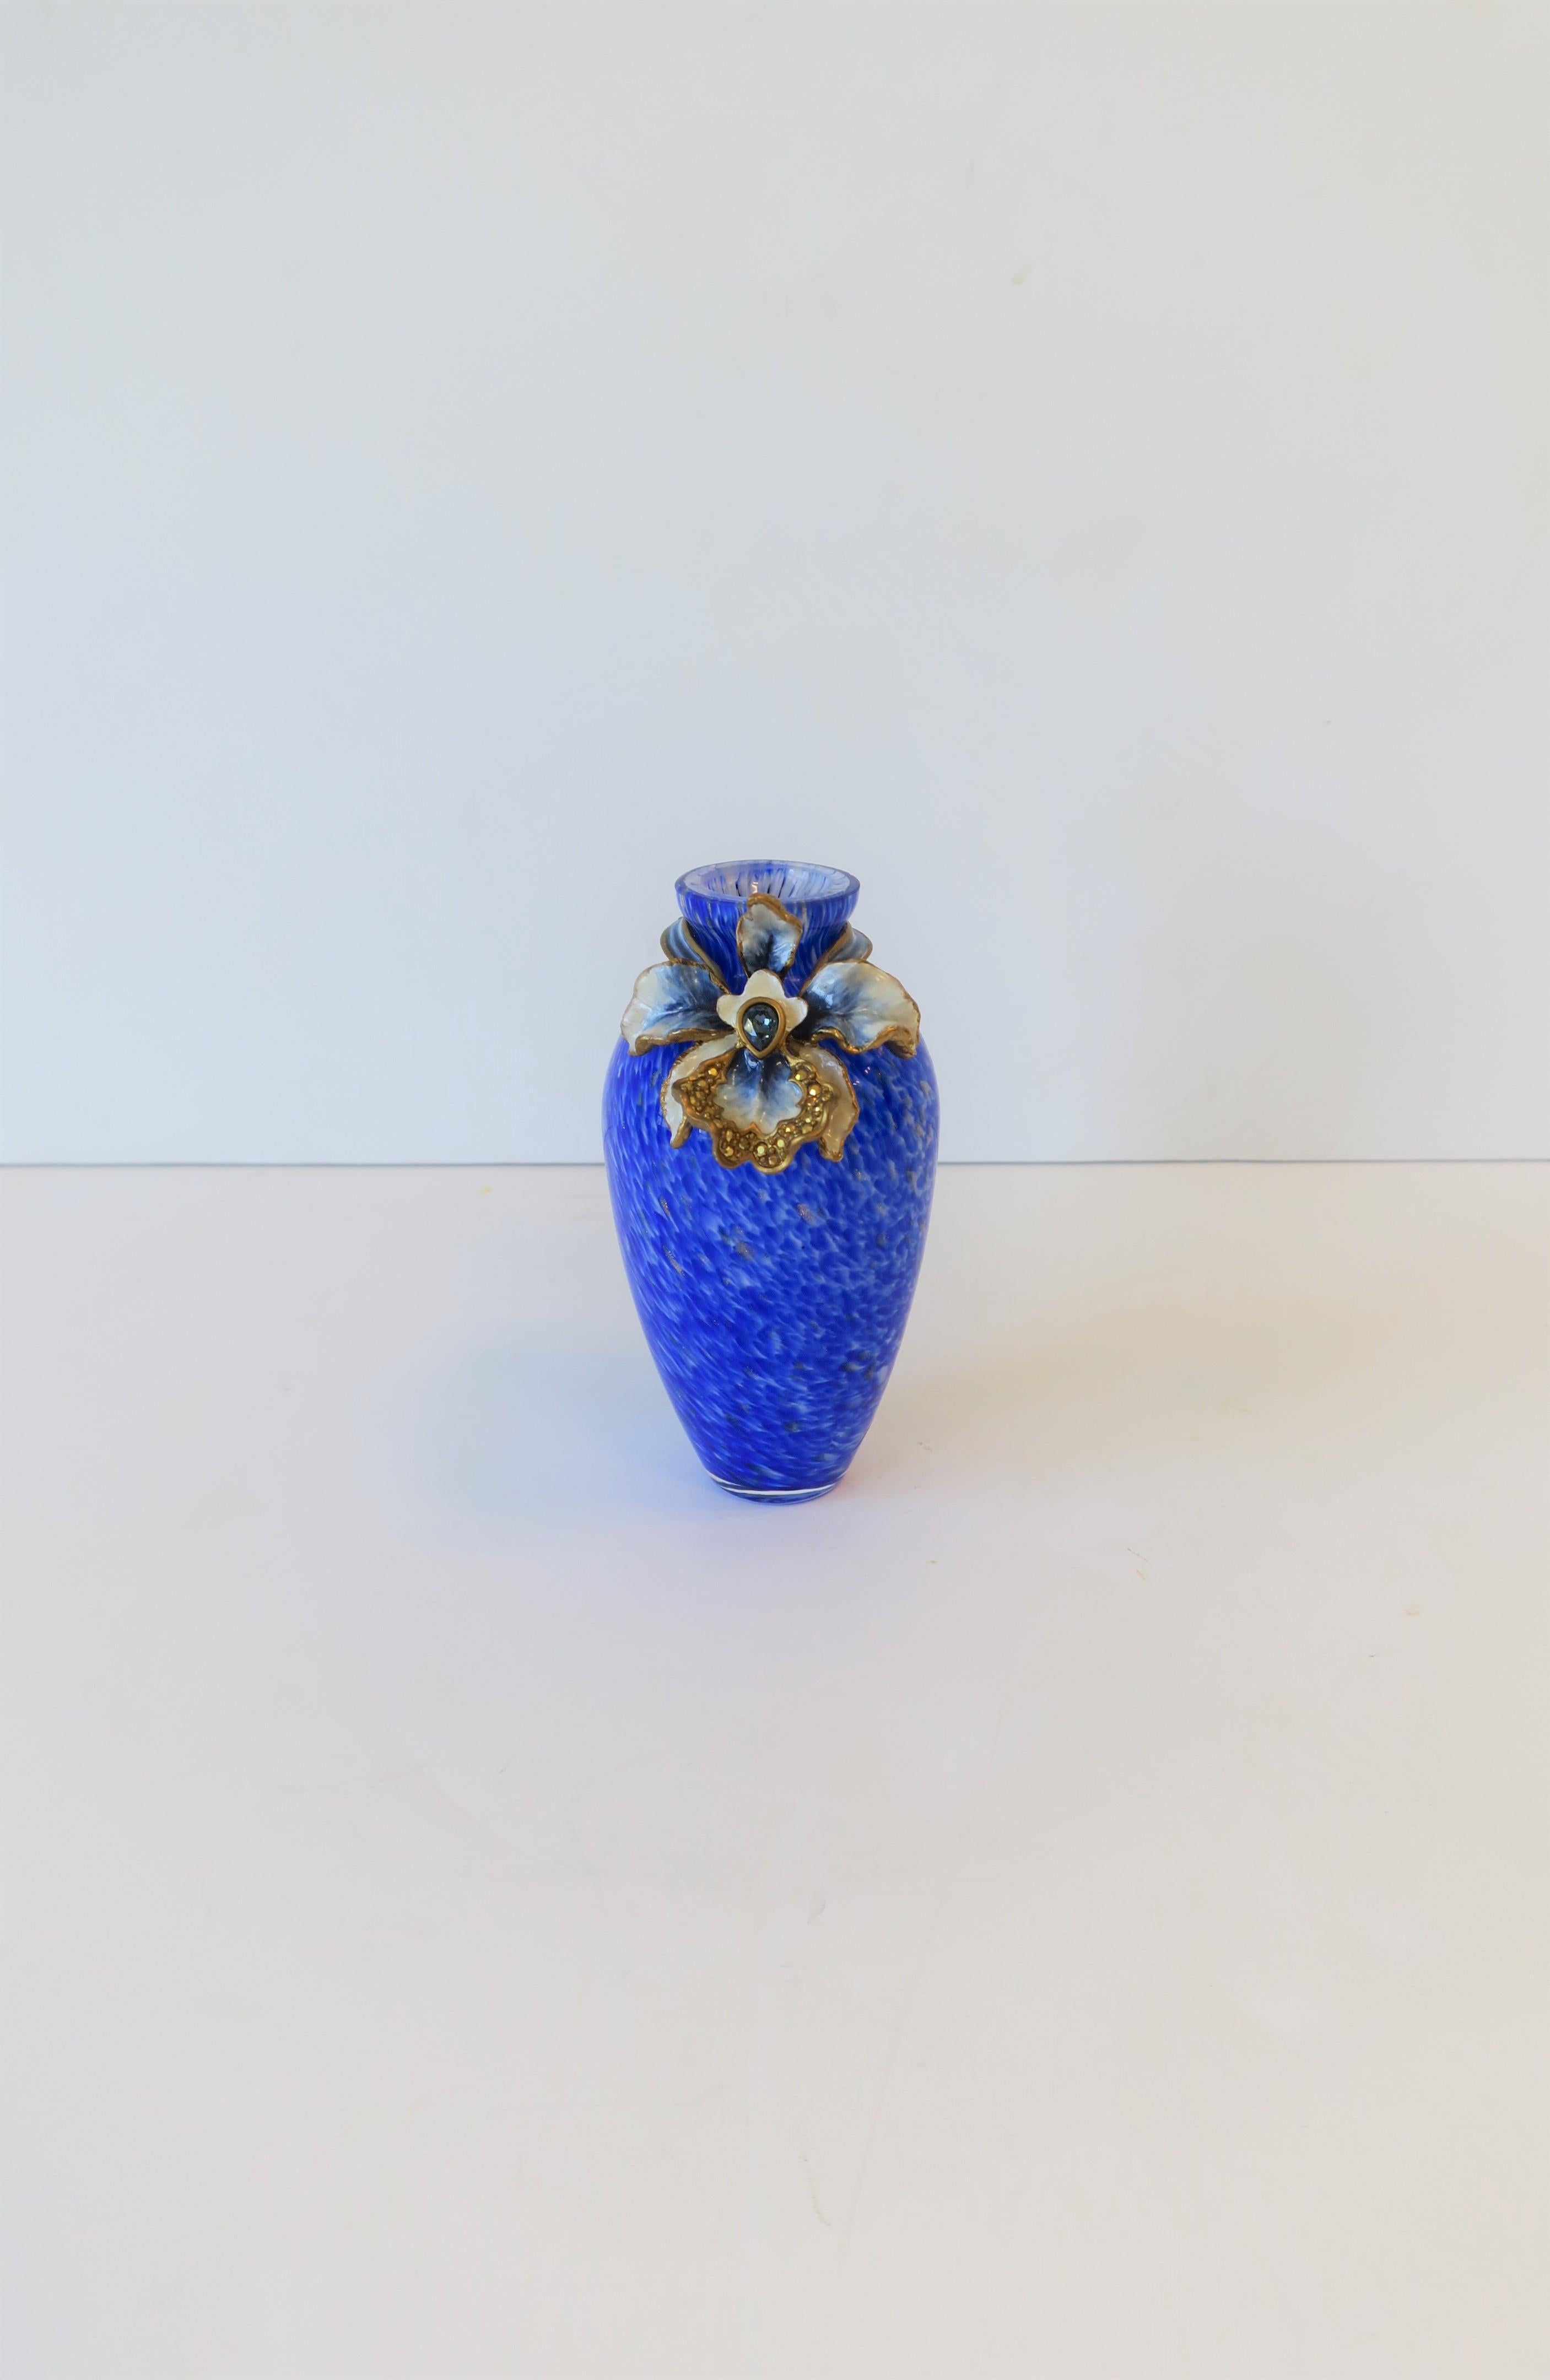 A very beautiful blue, white, and gold, handcrafted vase of hand blown glass by designer Jay Strongwater. A hand painted orchid sculpture surrounds neck is plated in 14-karat gold and embellished with crystals. With maker's mark on back of orchid as